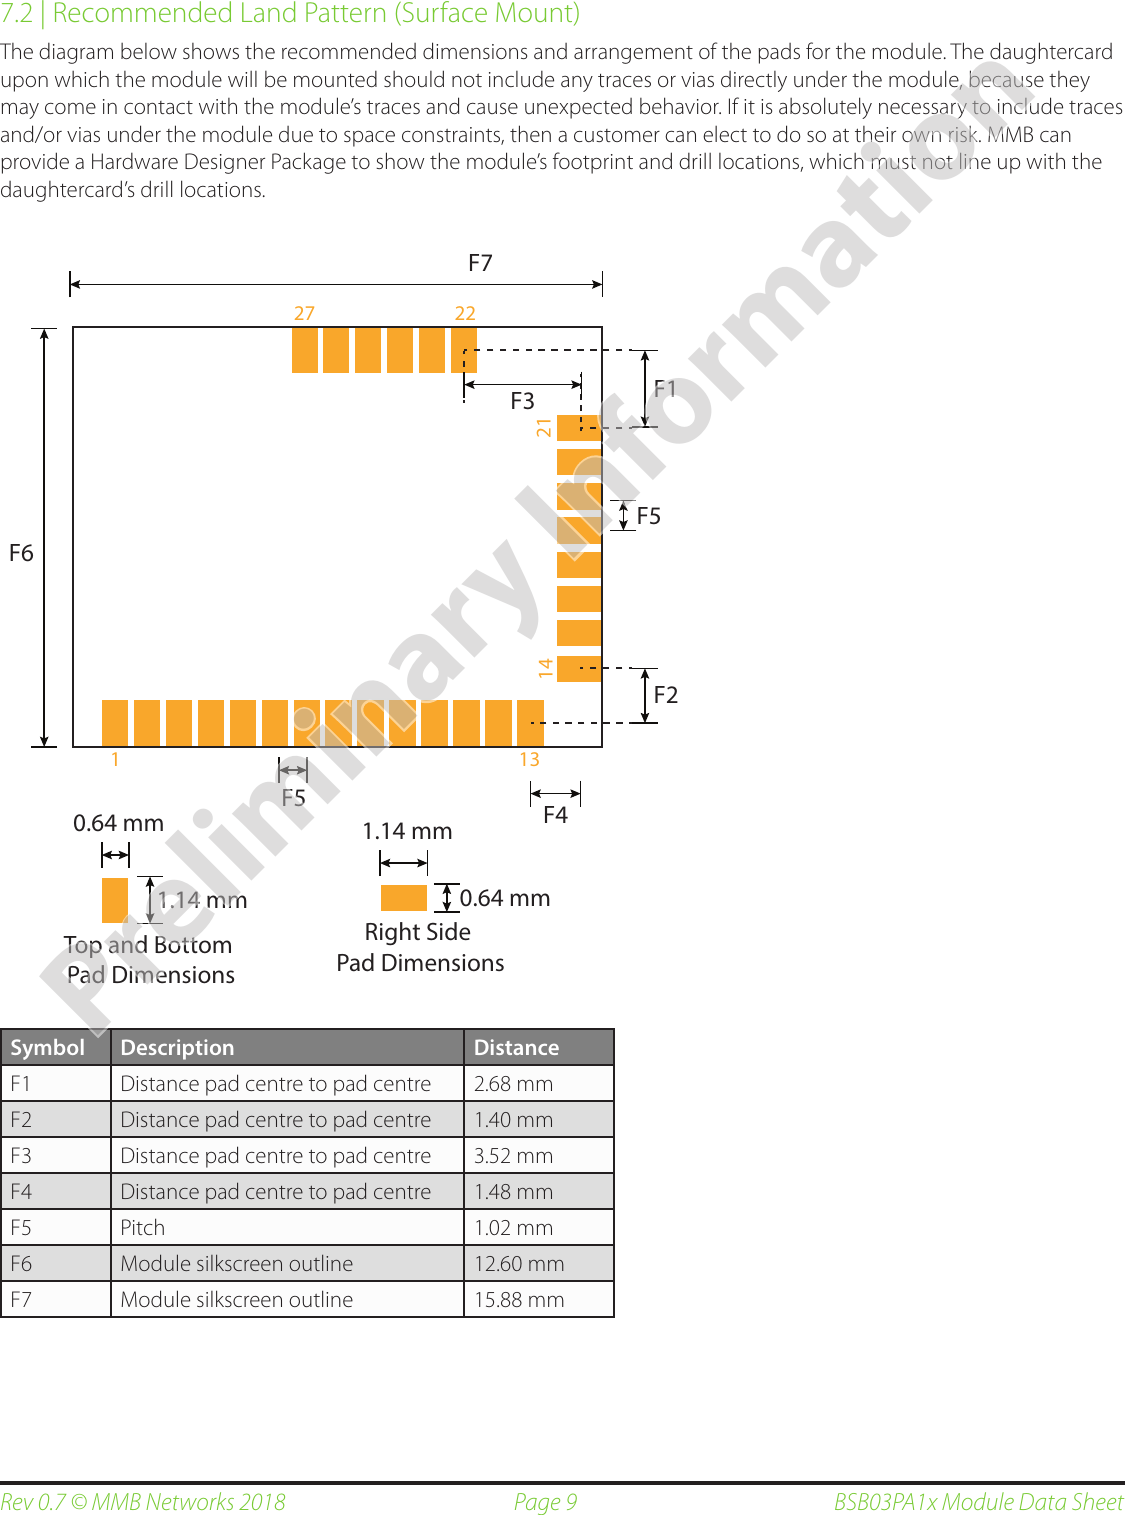 Page 9Rev 0.7 © MMB Networks 2018 BSB03PA1x Module Data Sheet7.2 | Recommended Land Pattern (Surface Mount)The diagram below shows the recommended dimensions and arrangement of the pads for the module. The daughtercard upon which the module will be mounted should not include any traces or vias directly under the module, because they may come in contact with the module’s traces and cause unexpected behavior. If it is absolutely necessary to include traces and/or vias under the module due to space constraints, then a customer can elect to do so at their own risk. MMB can provide a Hardware Designer Package to show the module’s footprint and drill locations, which must not line up with the daughtercard’s drill locations.F6F1F2F4F5F7Top and Bottom Pad Dimensions0.64 mm 1.14 mm1 1327 222114Right Side Pad Dimensions1.14 mm 0.64 mmF5F3Symbol Description DistanceF1 Distance pad centre to pad centre 2.68 mmF2 Distance pad centre to pad centre 1.40 mmF3 Distance pad centre to pad centre 3.52 mmF4 Distance pad centre to pad centre 1.48 mmF5 Pitch 1.02 mmF6 Module silkscreen outline 12.60 mmF7 Module silkscreen outline 15.88 mmPreliminary Information